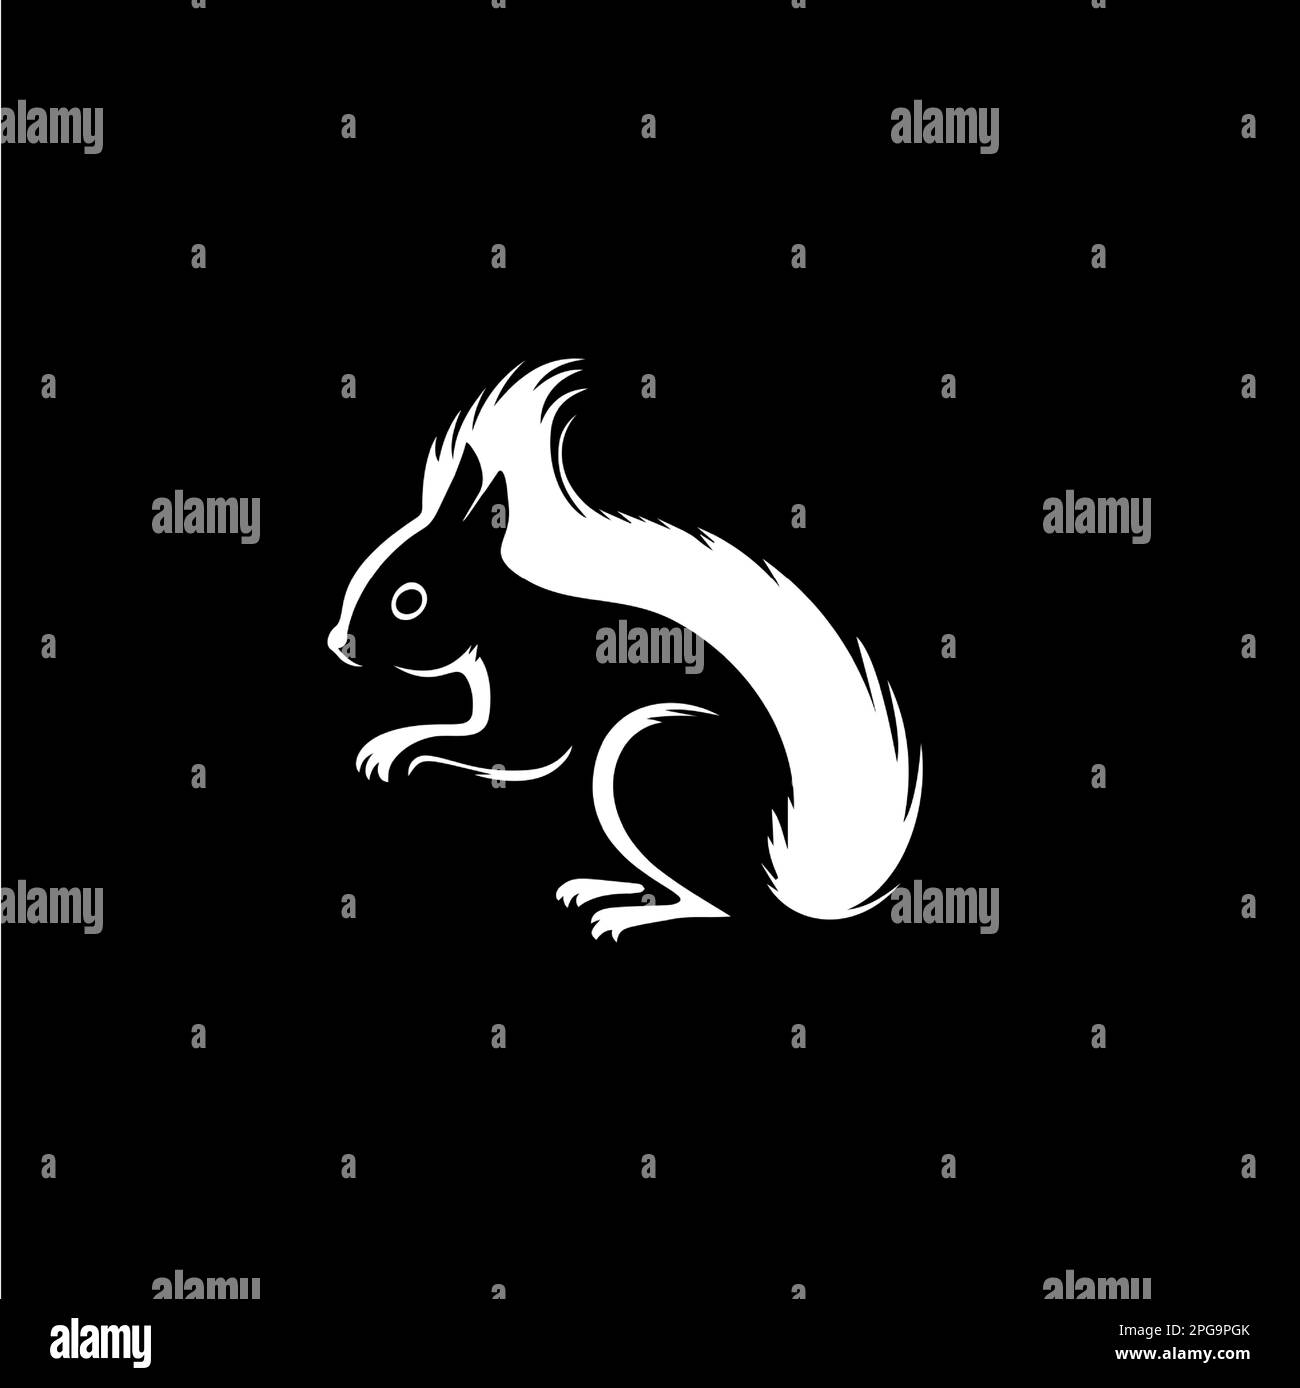 Squirrel head and tail icon, wild animal logo template. Hand drawing emblem on black background for body art and tattoo, minimalistic sketch art Stock Vector